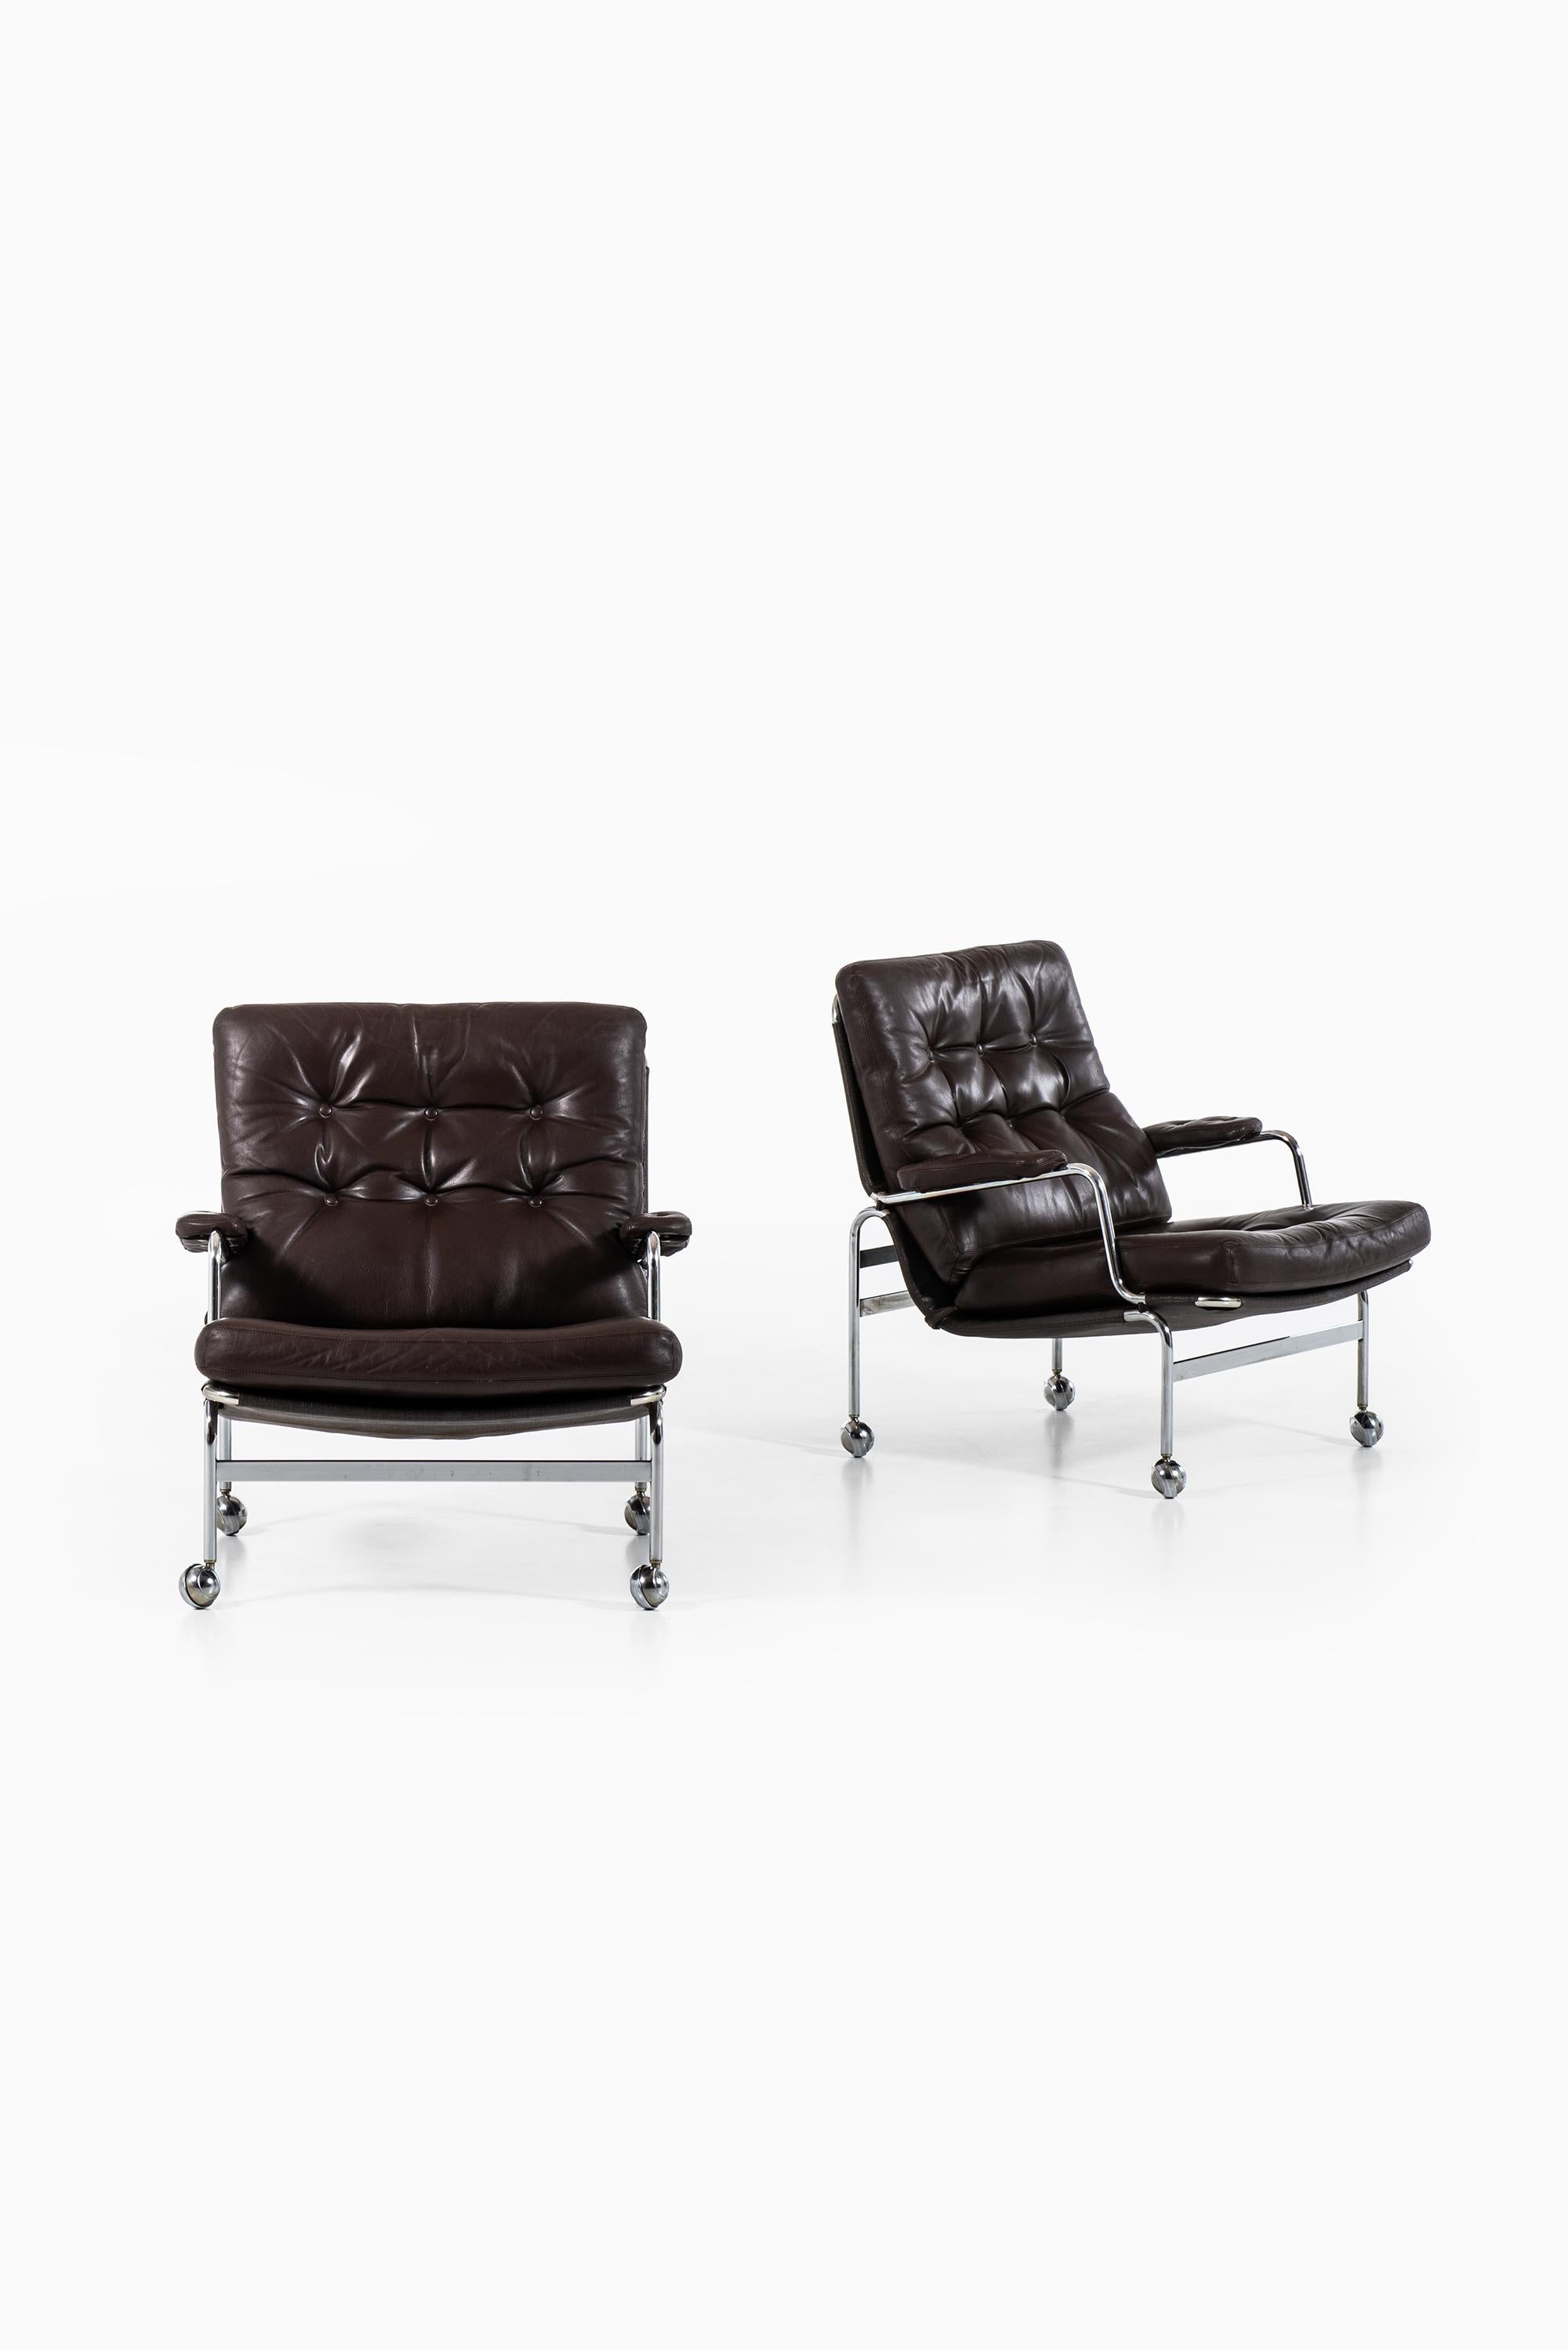 Pair of easy chairs model Karin designed by Bruno Mathsson. Produced by DUX in Sweden.